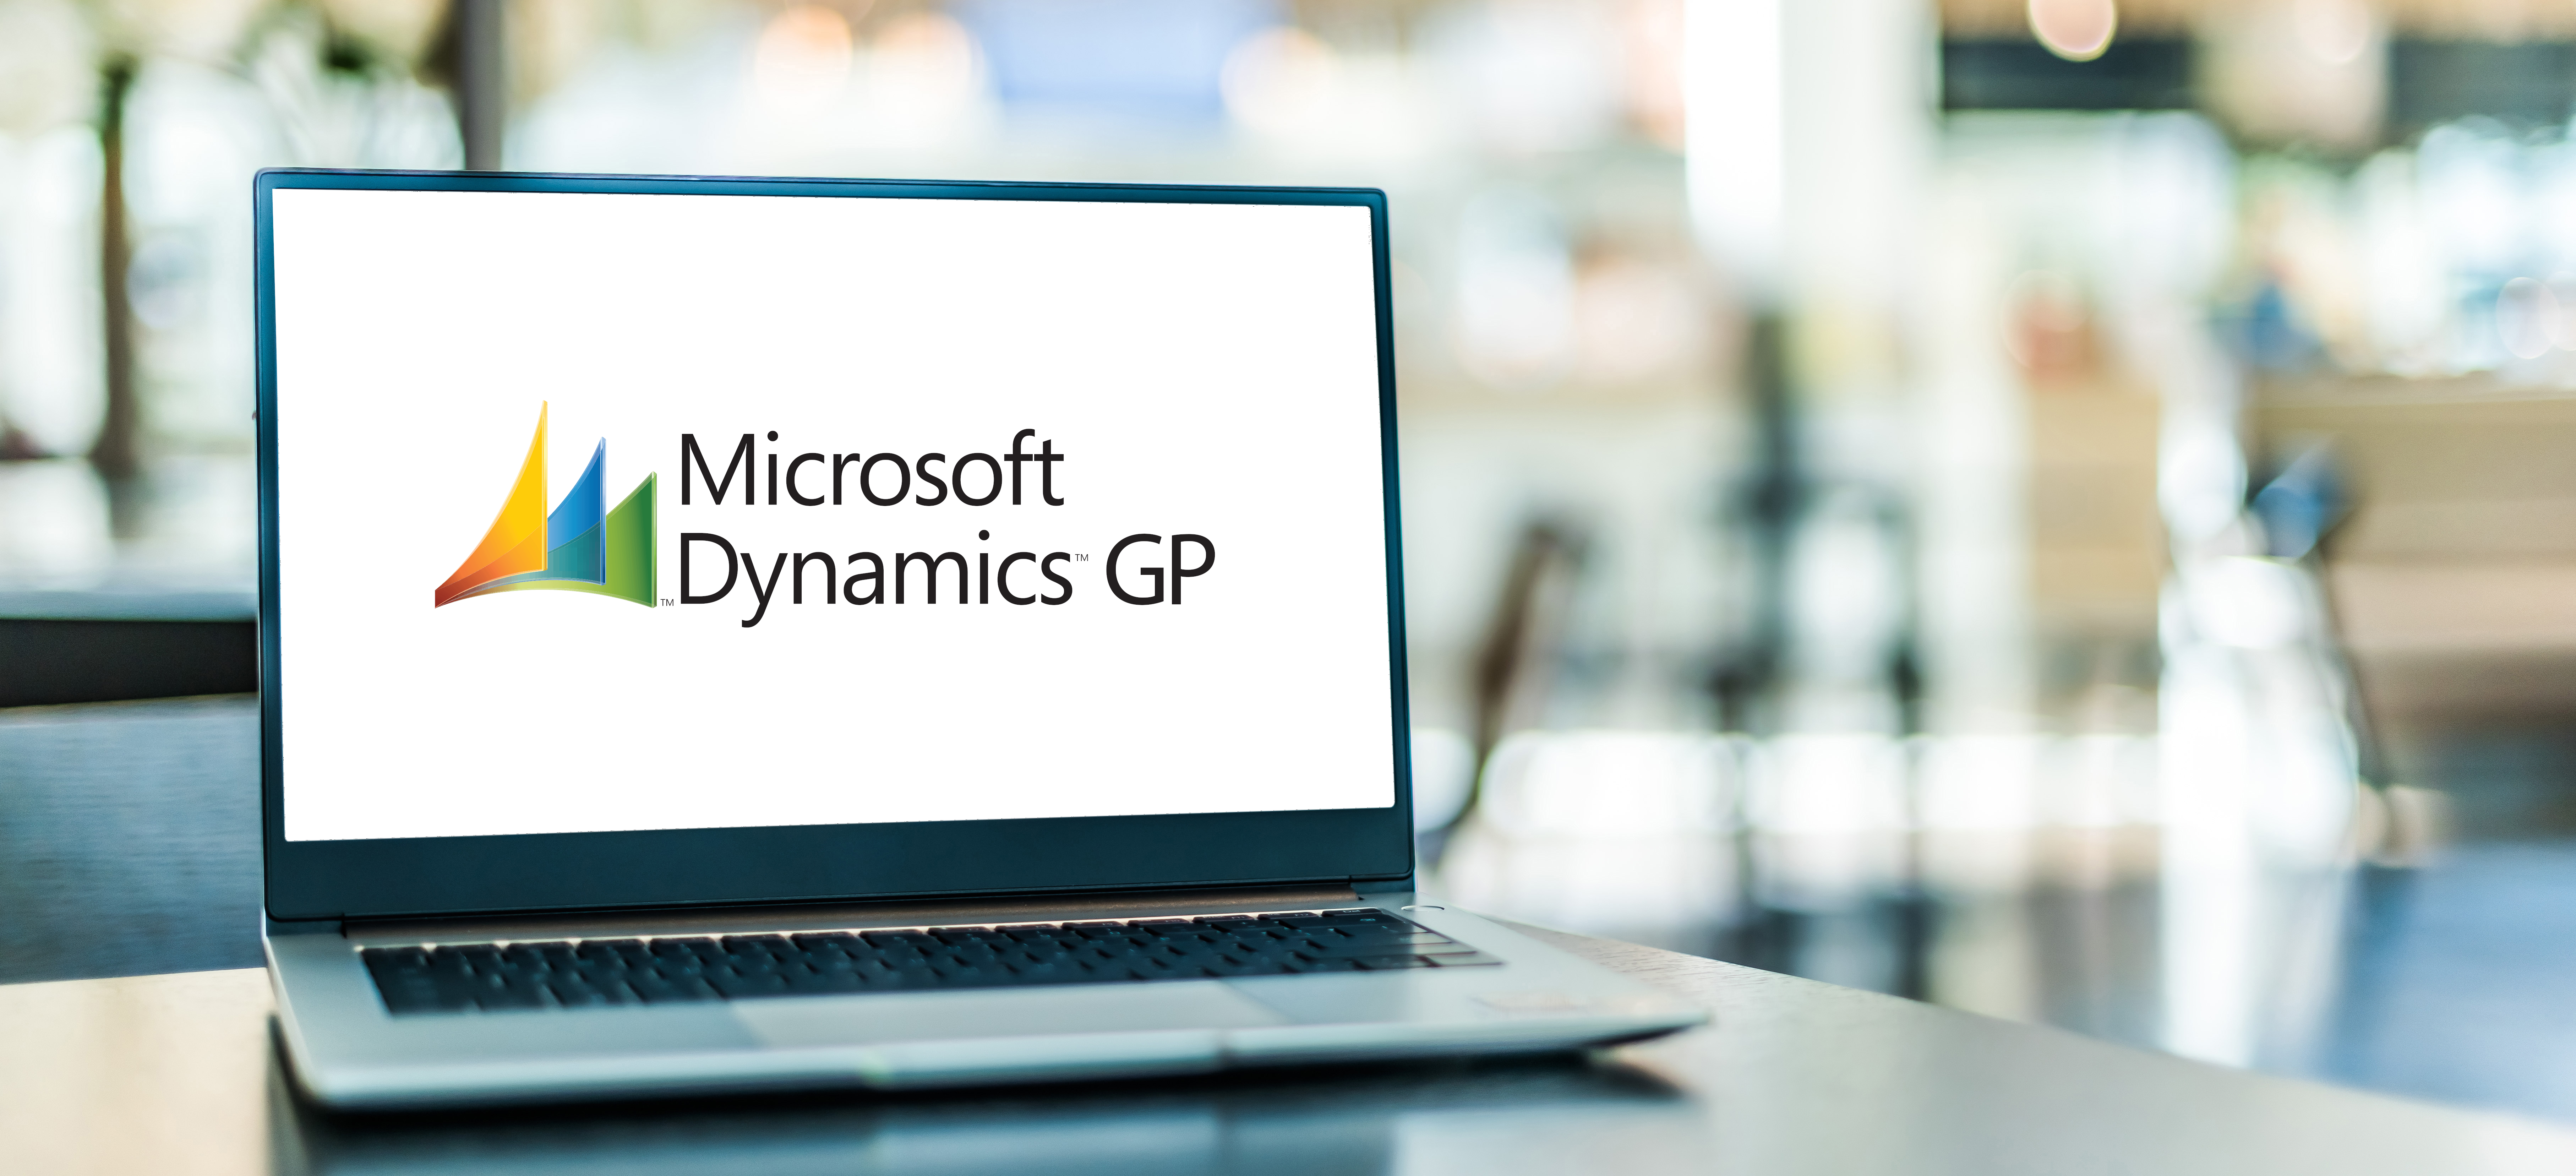 What's New in Dynamics GP